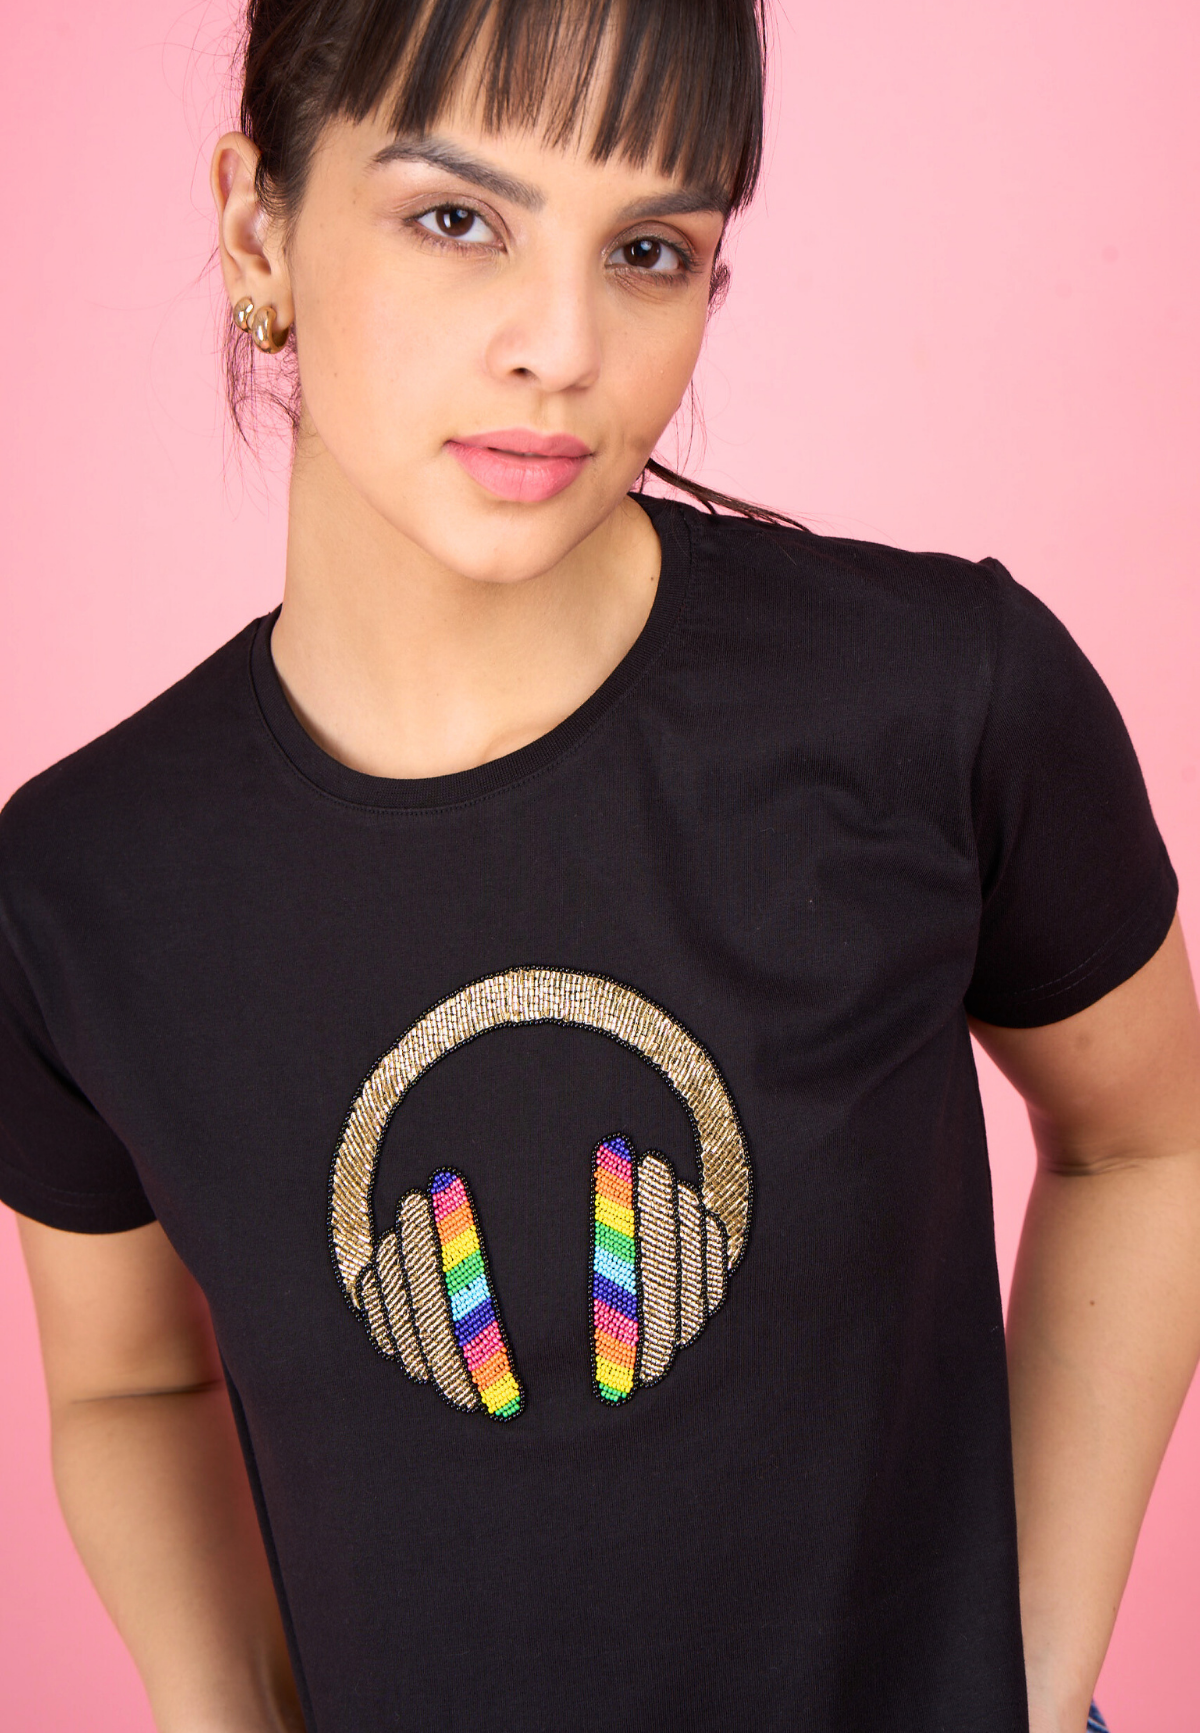 Black Embroidered Muisc T-Shirt